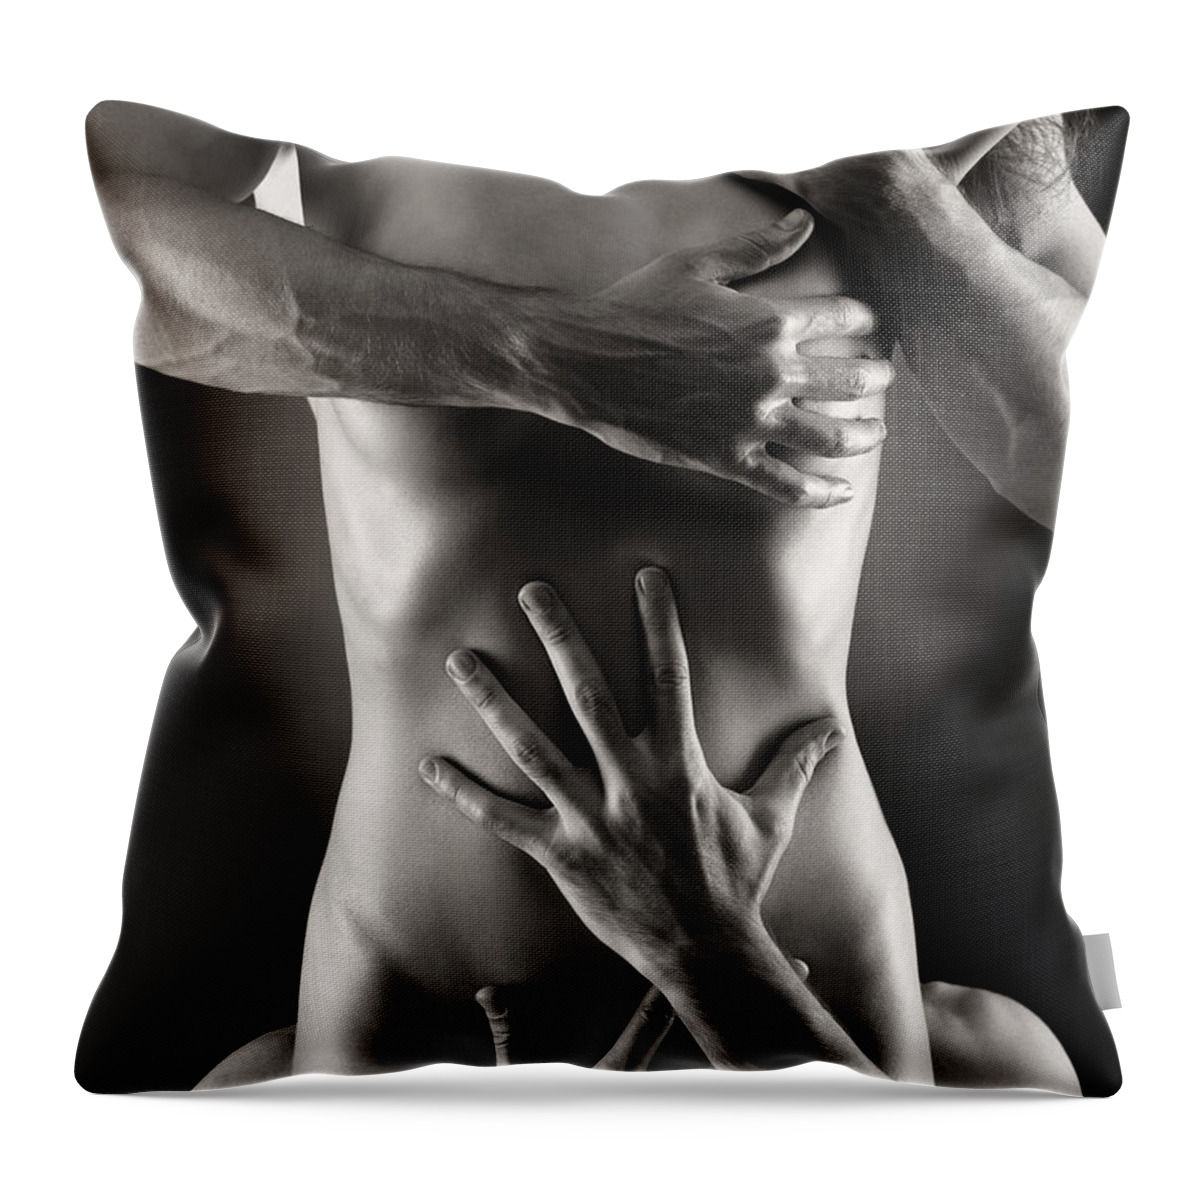 Sensual Throw Pillow featuring the photograph Two men embracing naked woman by Maxim Images Exquisite Prints